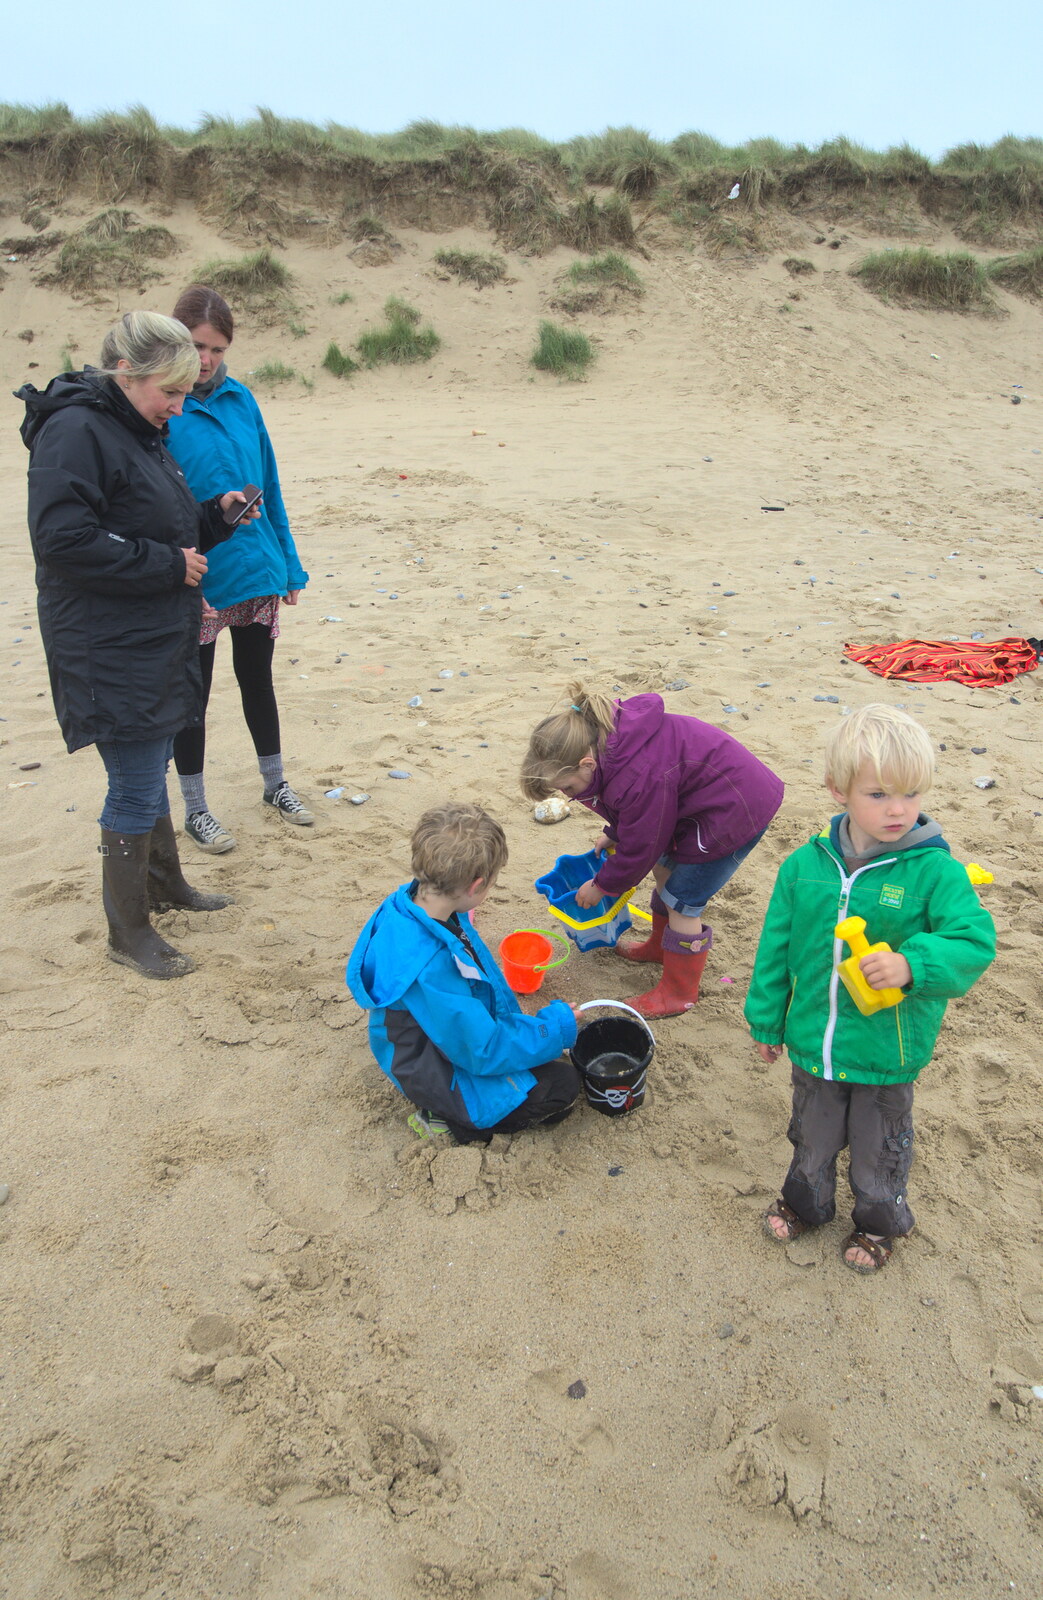 More sand castle building from A Wet Weekend of Camping, Waxham Sands, Norfolk - 13th June 2015